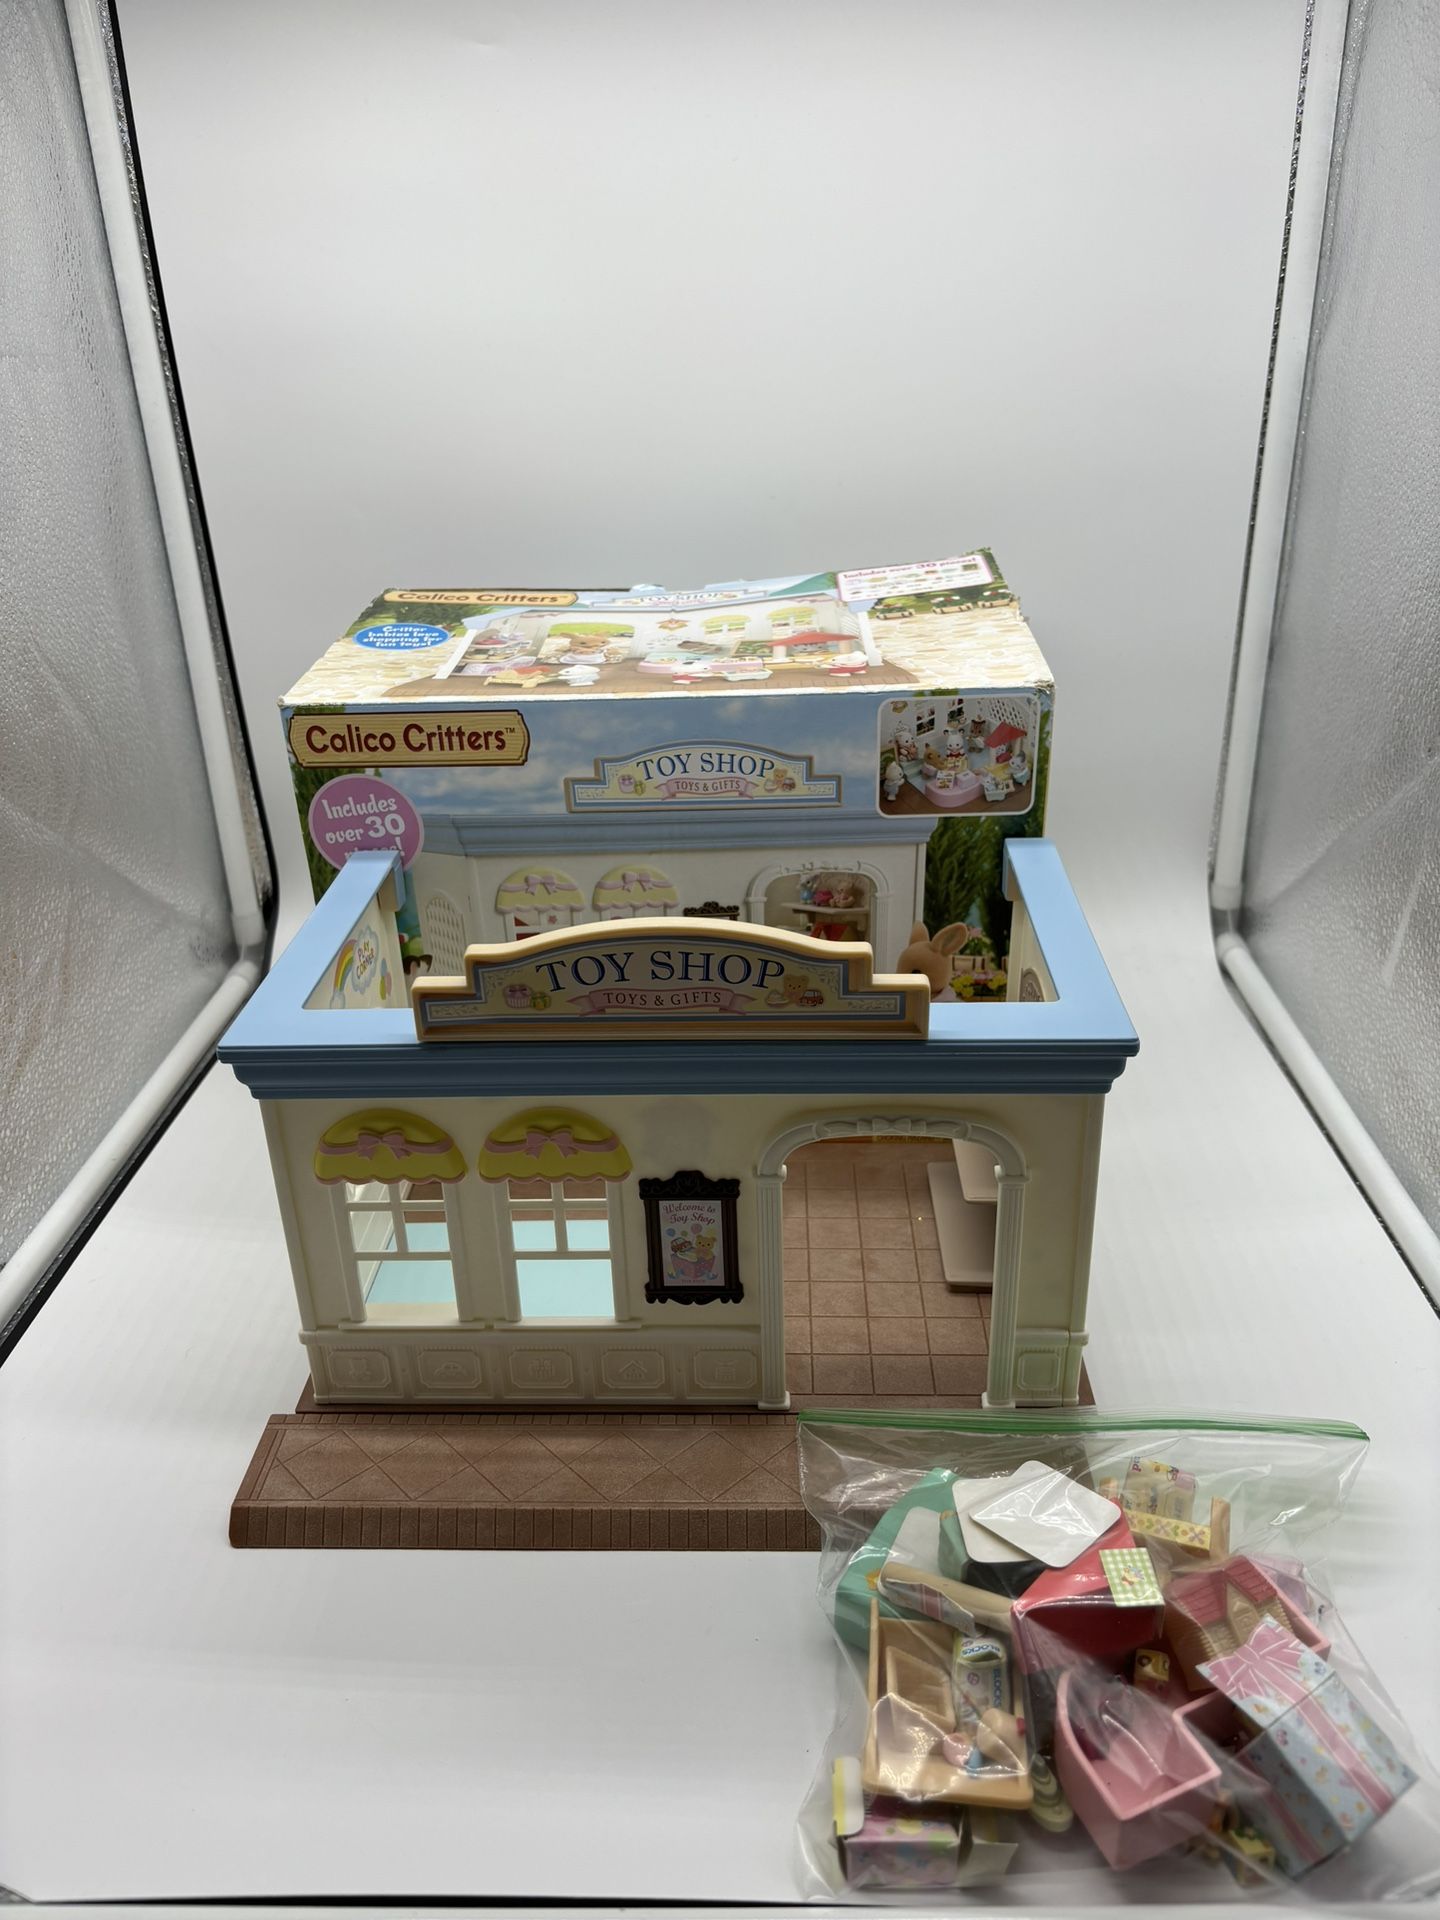 Calico Critters Toy Shop Store Playset with Accessories Discontinued Sylvanian